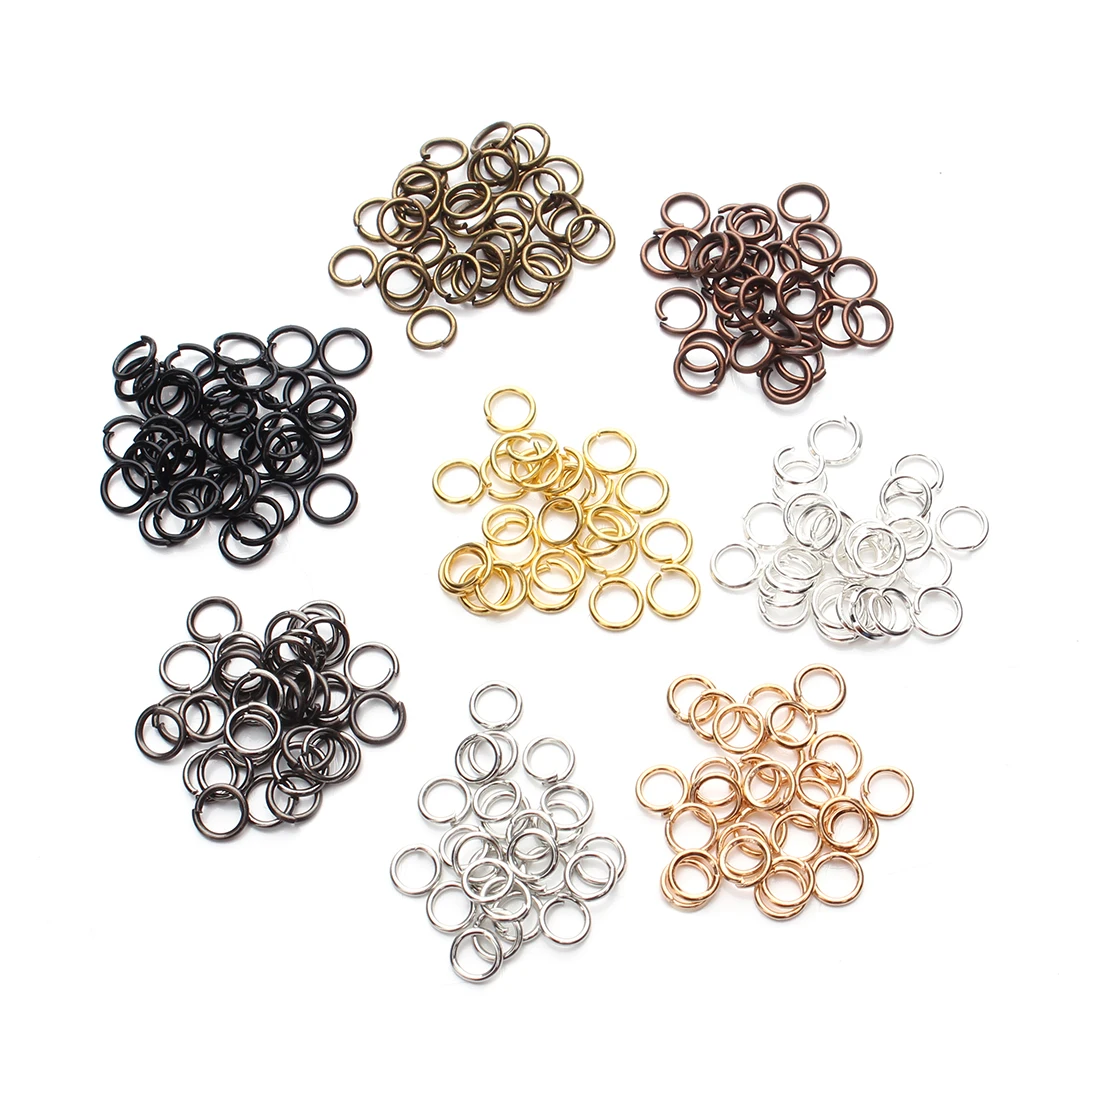 

100-200pcs/Lot 4 5 6 8 10mm Open Jump Rings Split Rings Connectors For Diy Jewelry Finding Making Accessories Wholesale Supplies